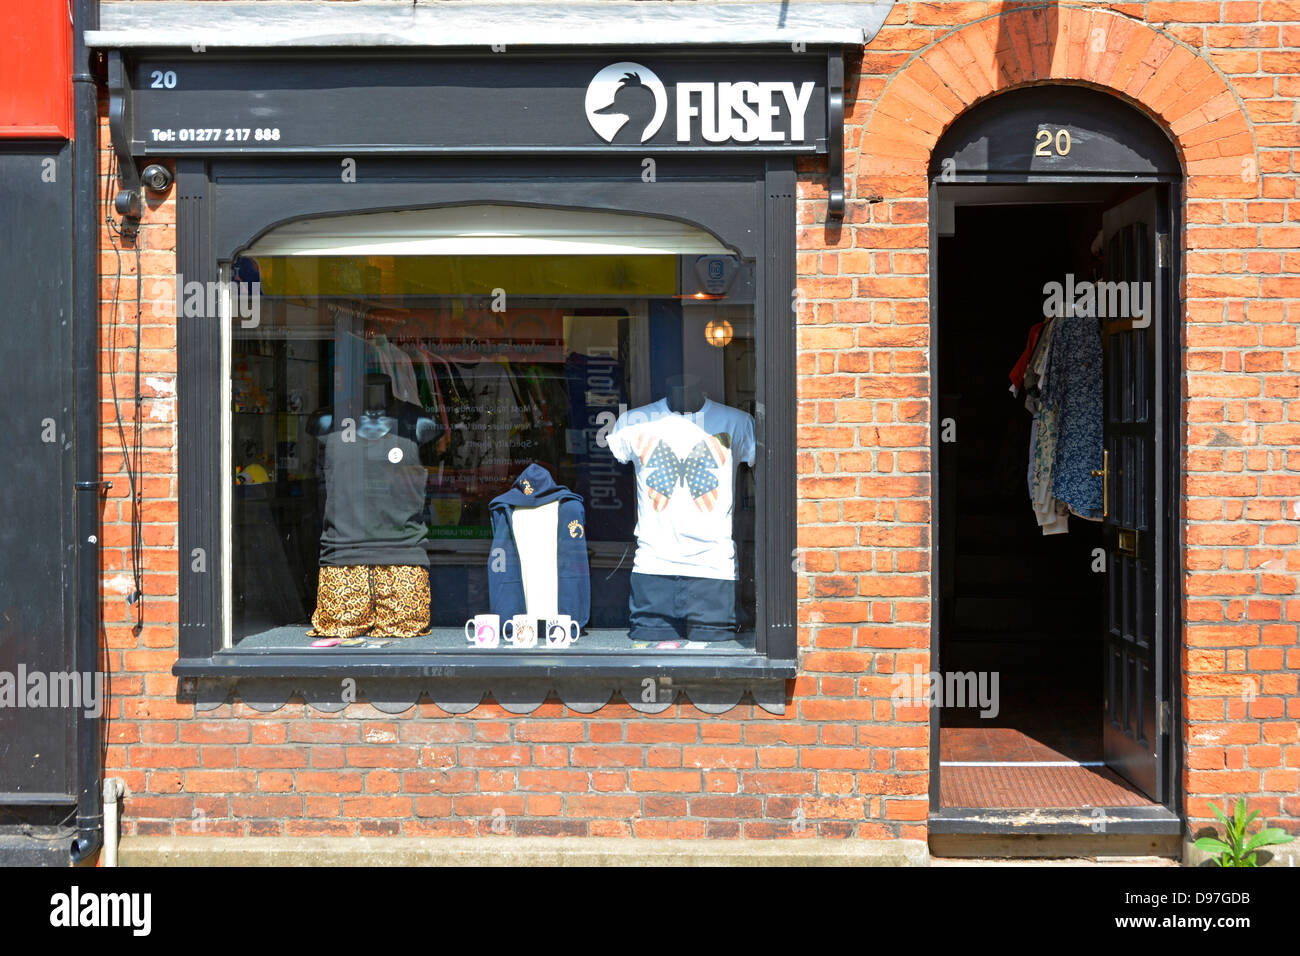 The only way is Essex TOWIE television reality show cast member Joey Donald Essex retail business Fusey shop front window Brentwood Essex England UK Stock Photo